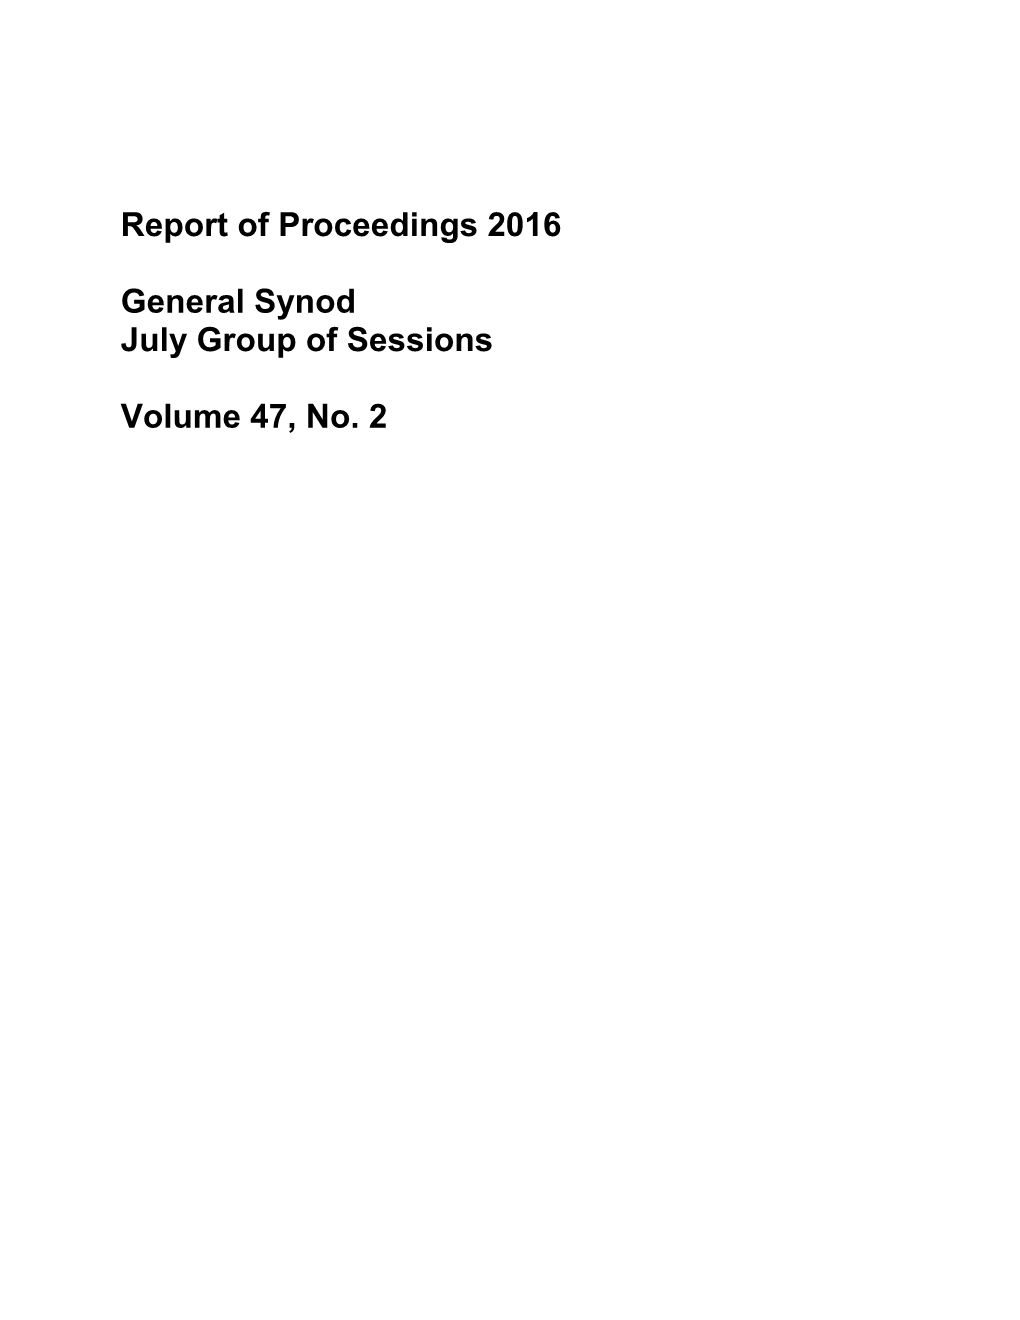 Report of Proceedings 2016 General Synod July Group of Sessions